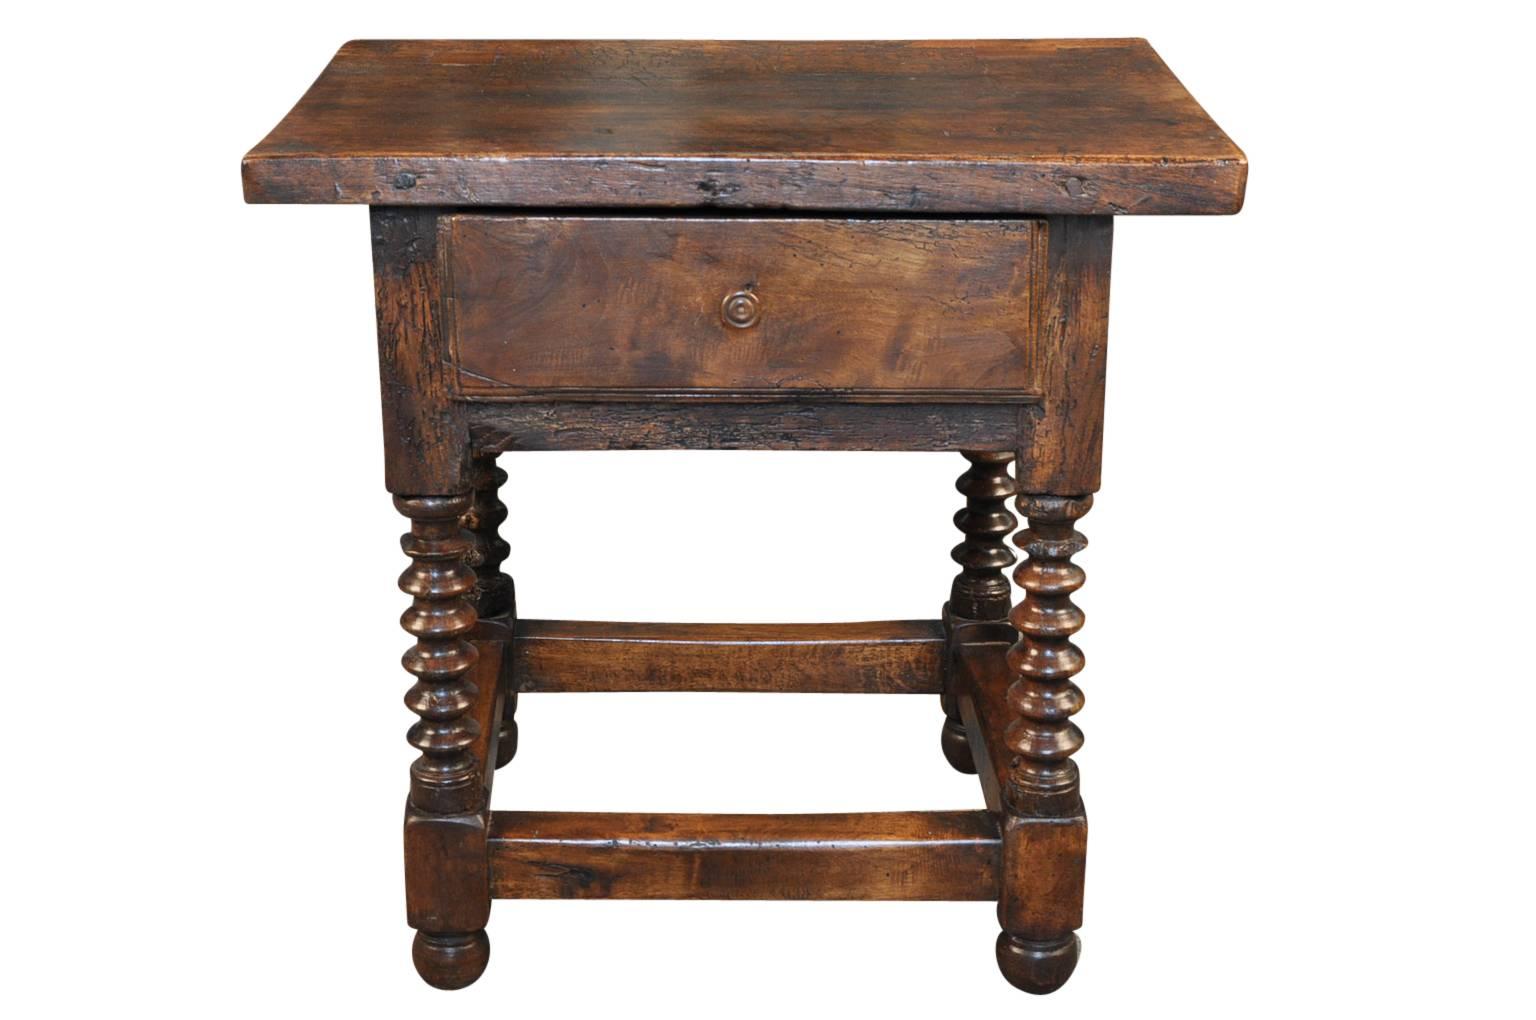 A very charming 18th century Spanish side table from the Catalan region of Spain. Wonderfully constructed from walnut with a single drawer and nicely turned legs. Outstanding patina.